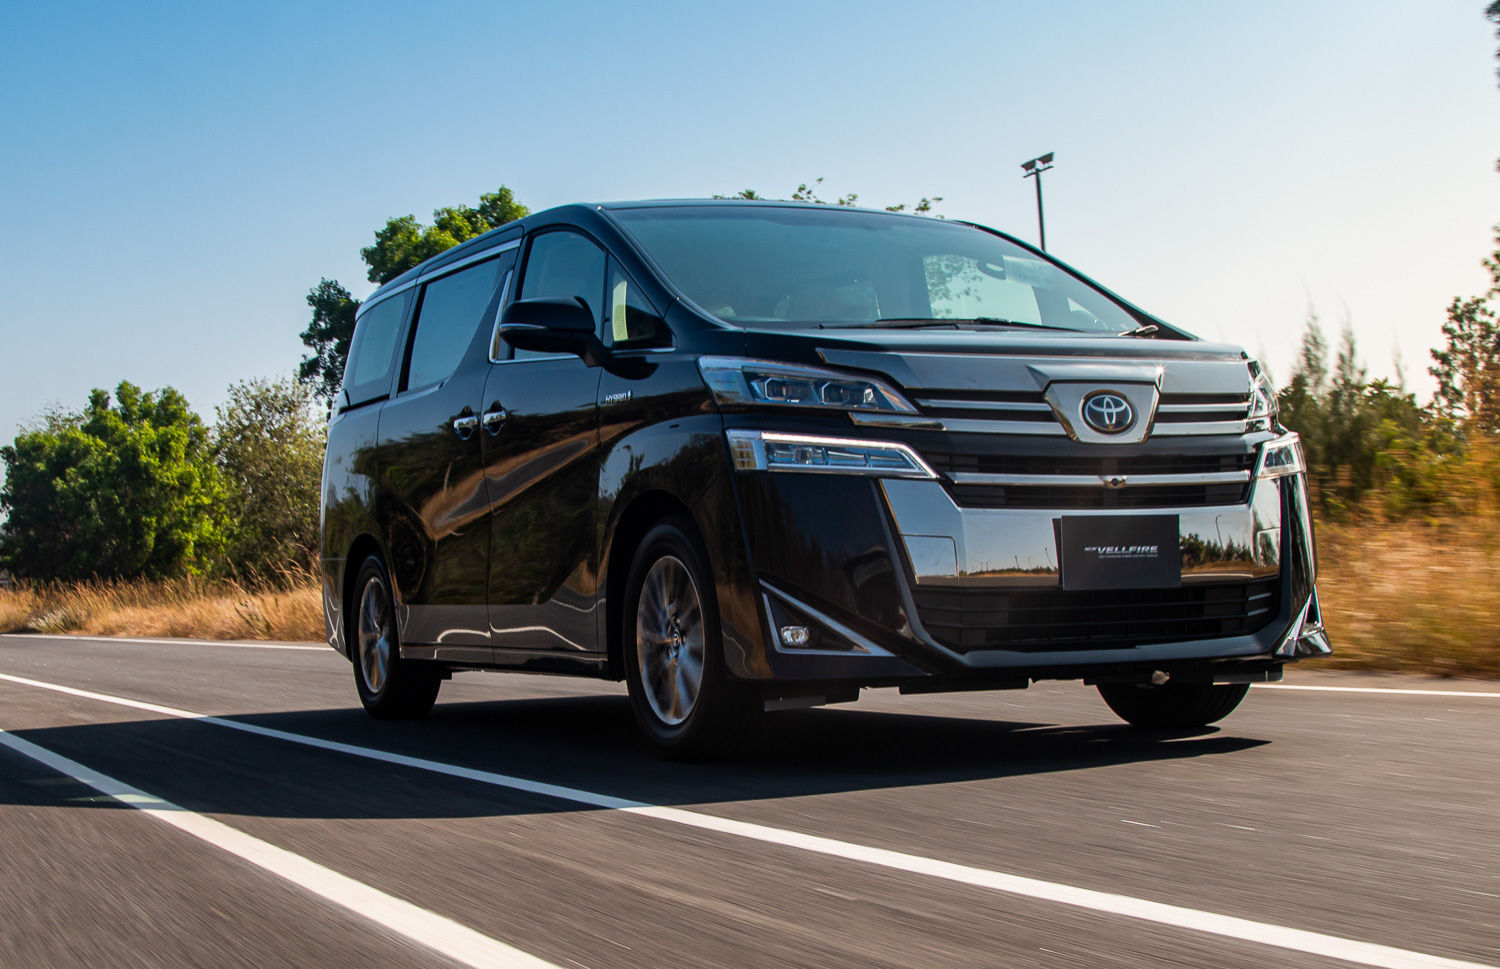 Toyota Vellfire: First Drive Review